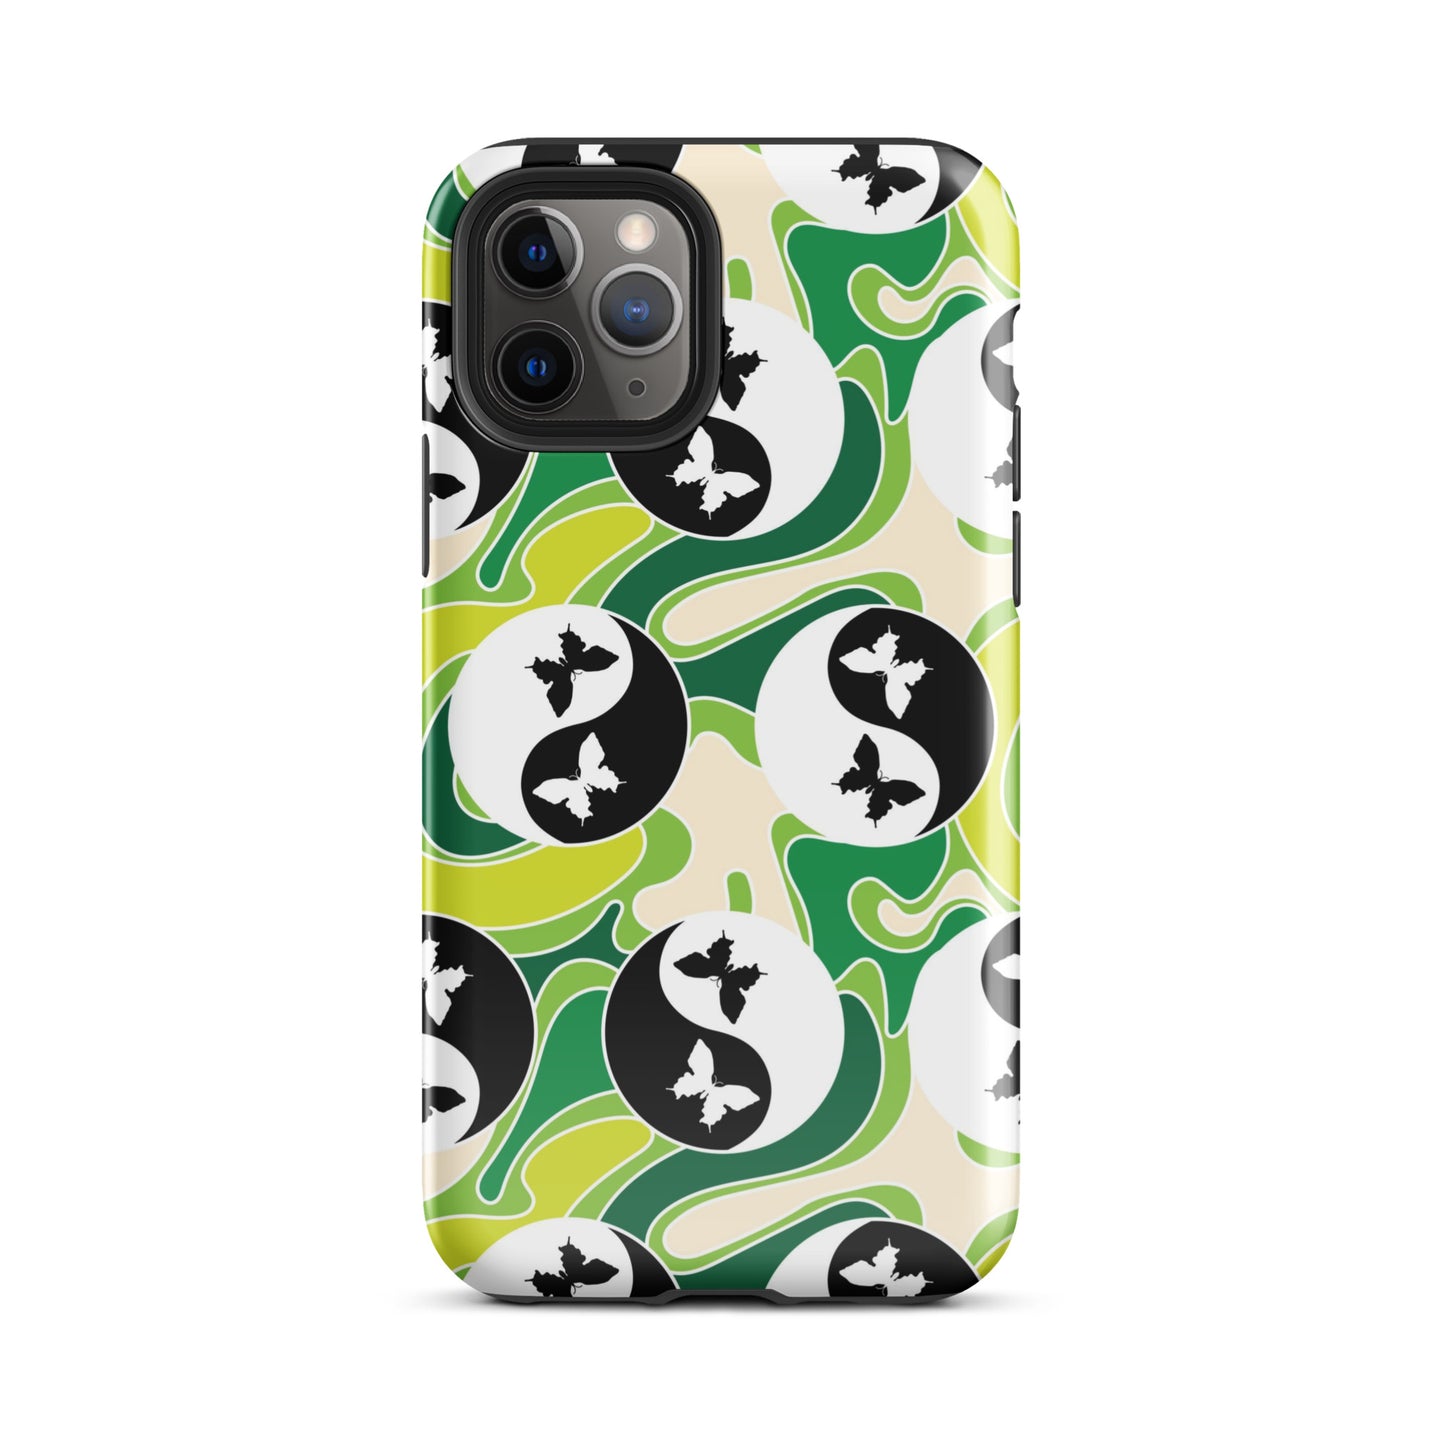 Yin Yang Butterfly iPhone Case Glossy iPhone 11 Pro